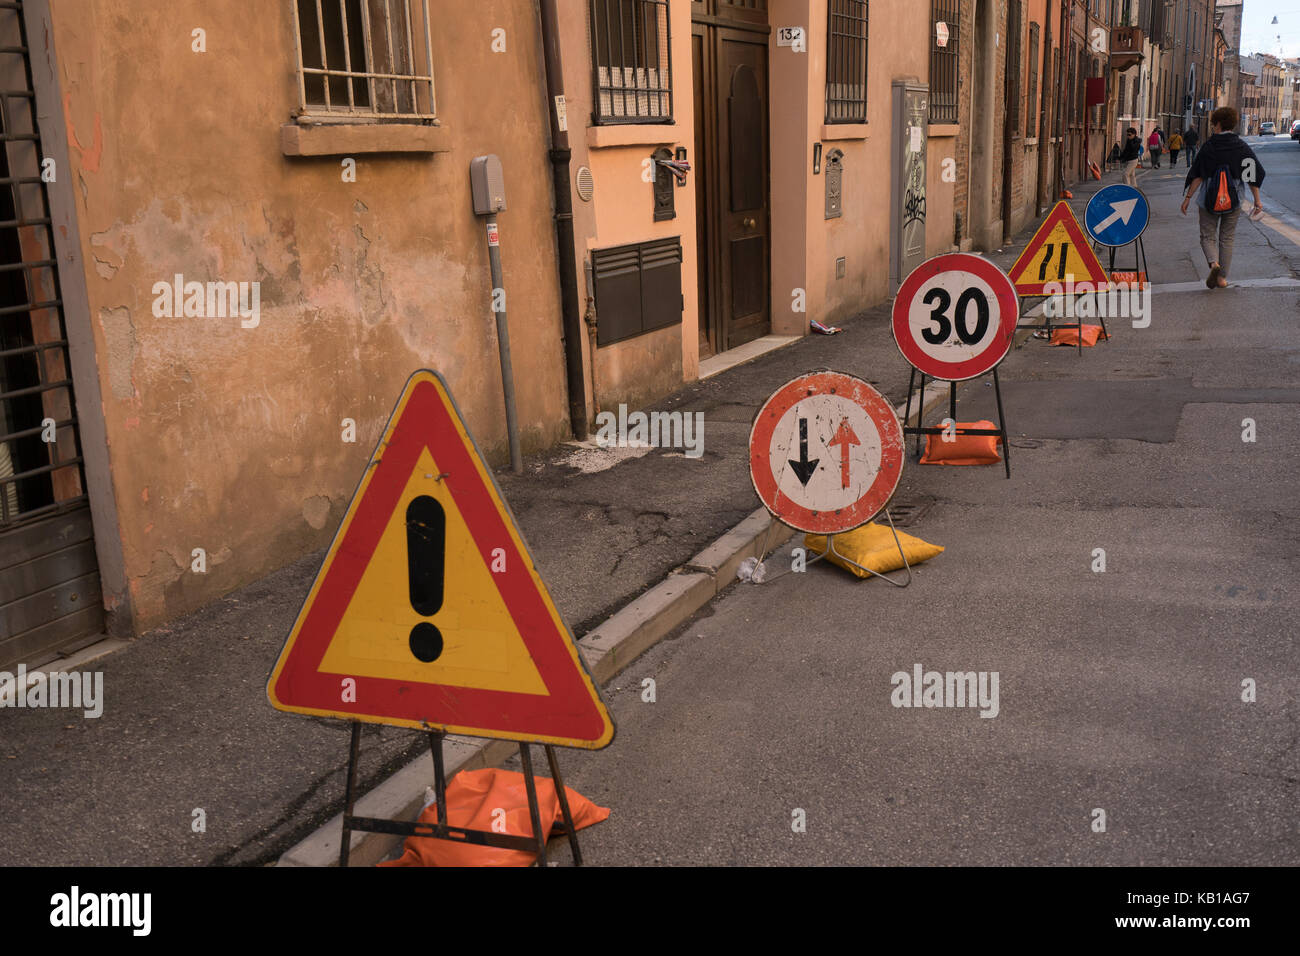 A general view of road signs in Ferrara in Italy. From a series of travel photos in Italy. Photo date: Sunday, September 17, 2017. Photo credit should Stock Photo